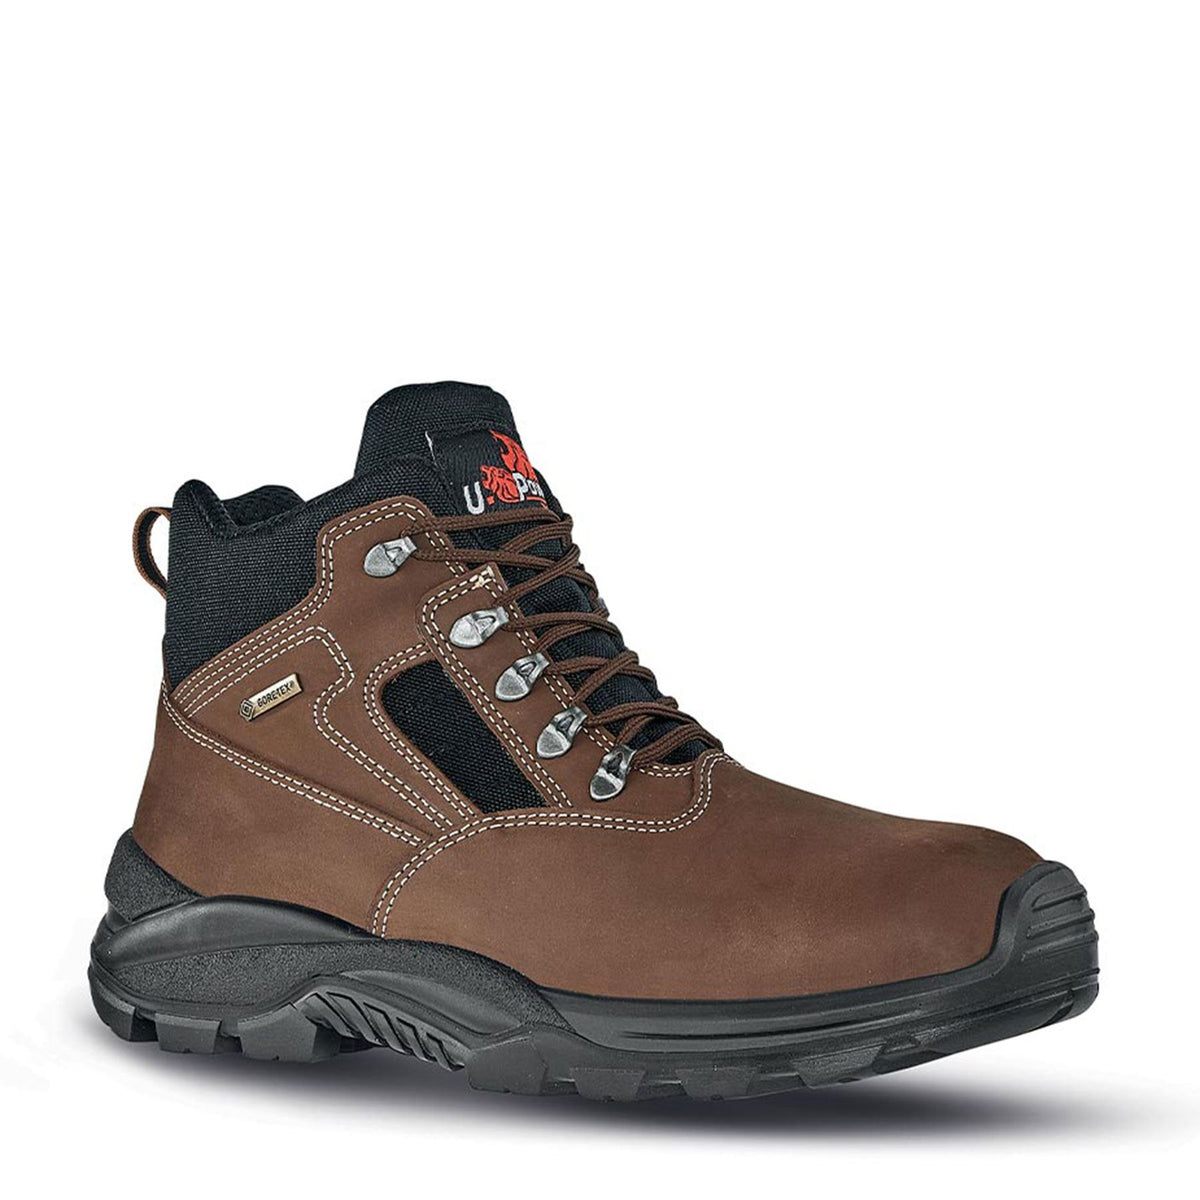 U-Power Smash Gore-Tex Safety Men's Leather Brown Boots